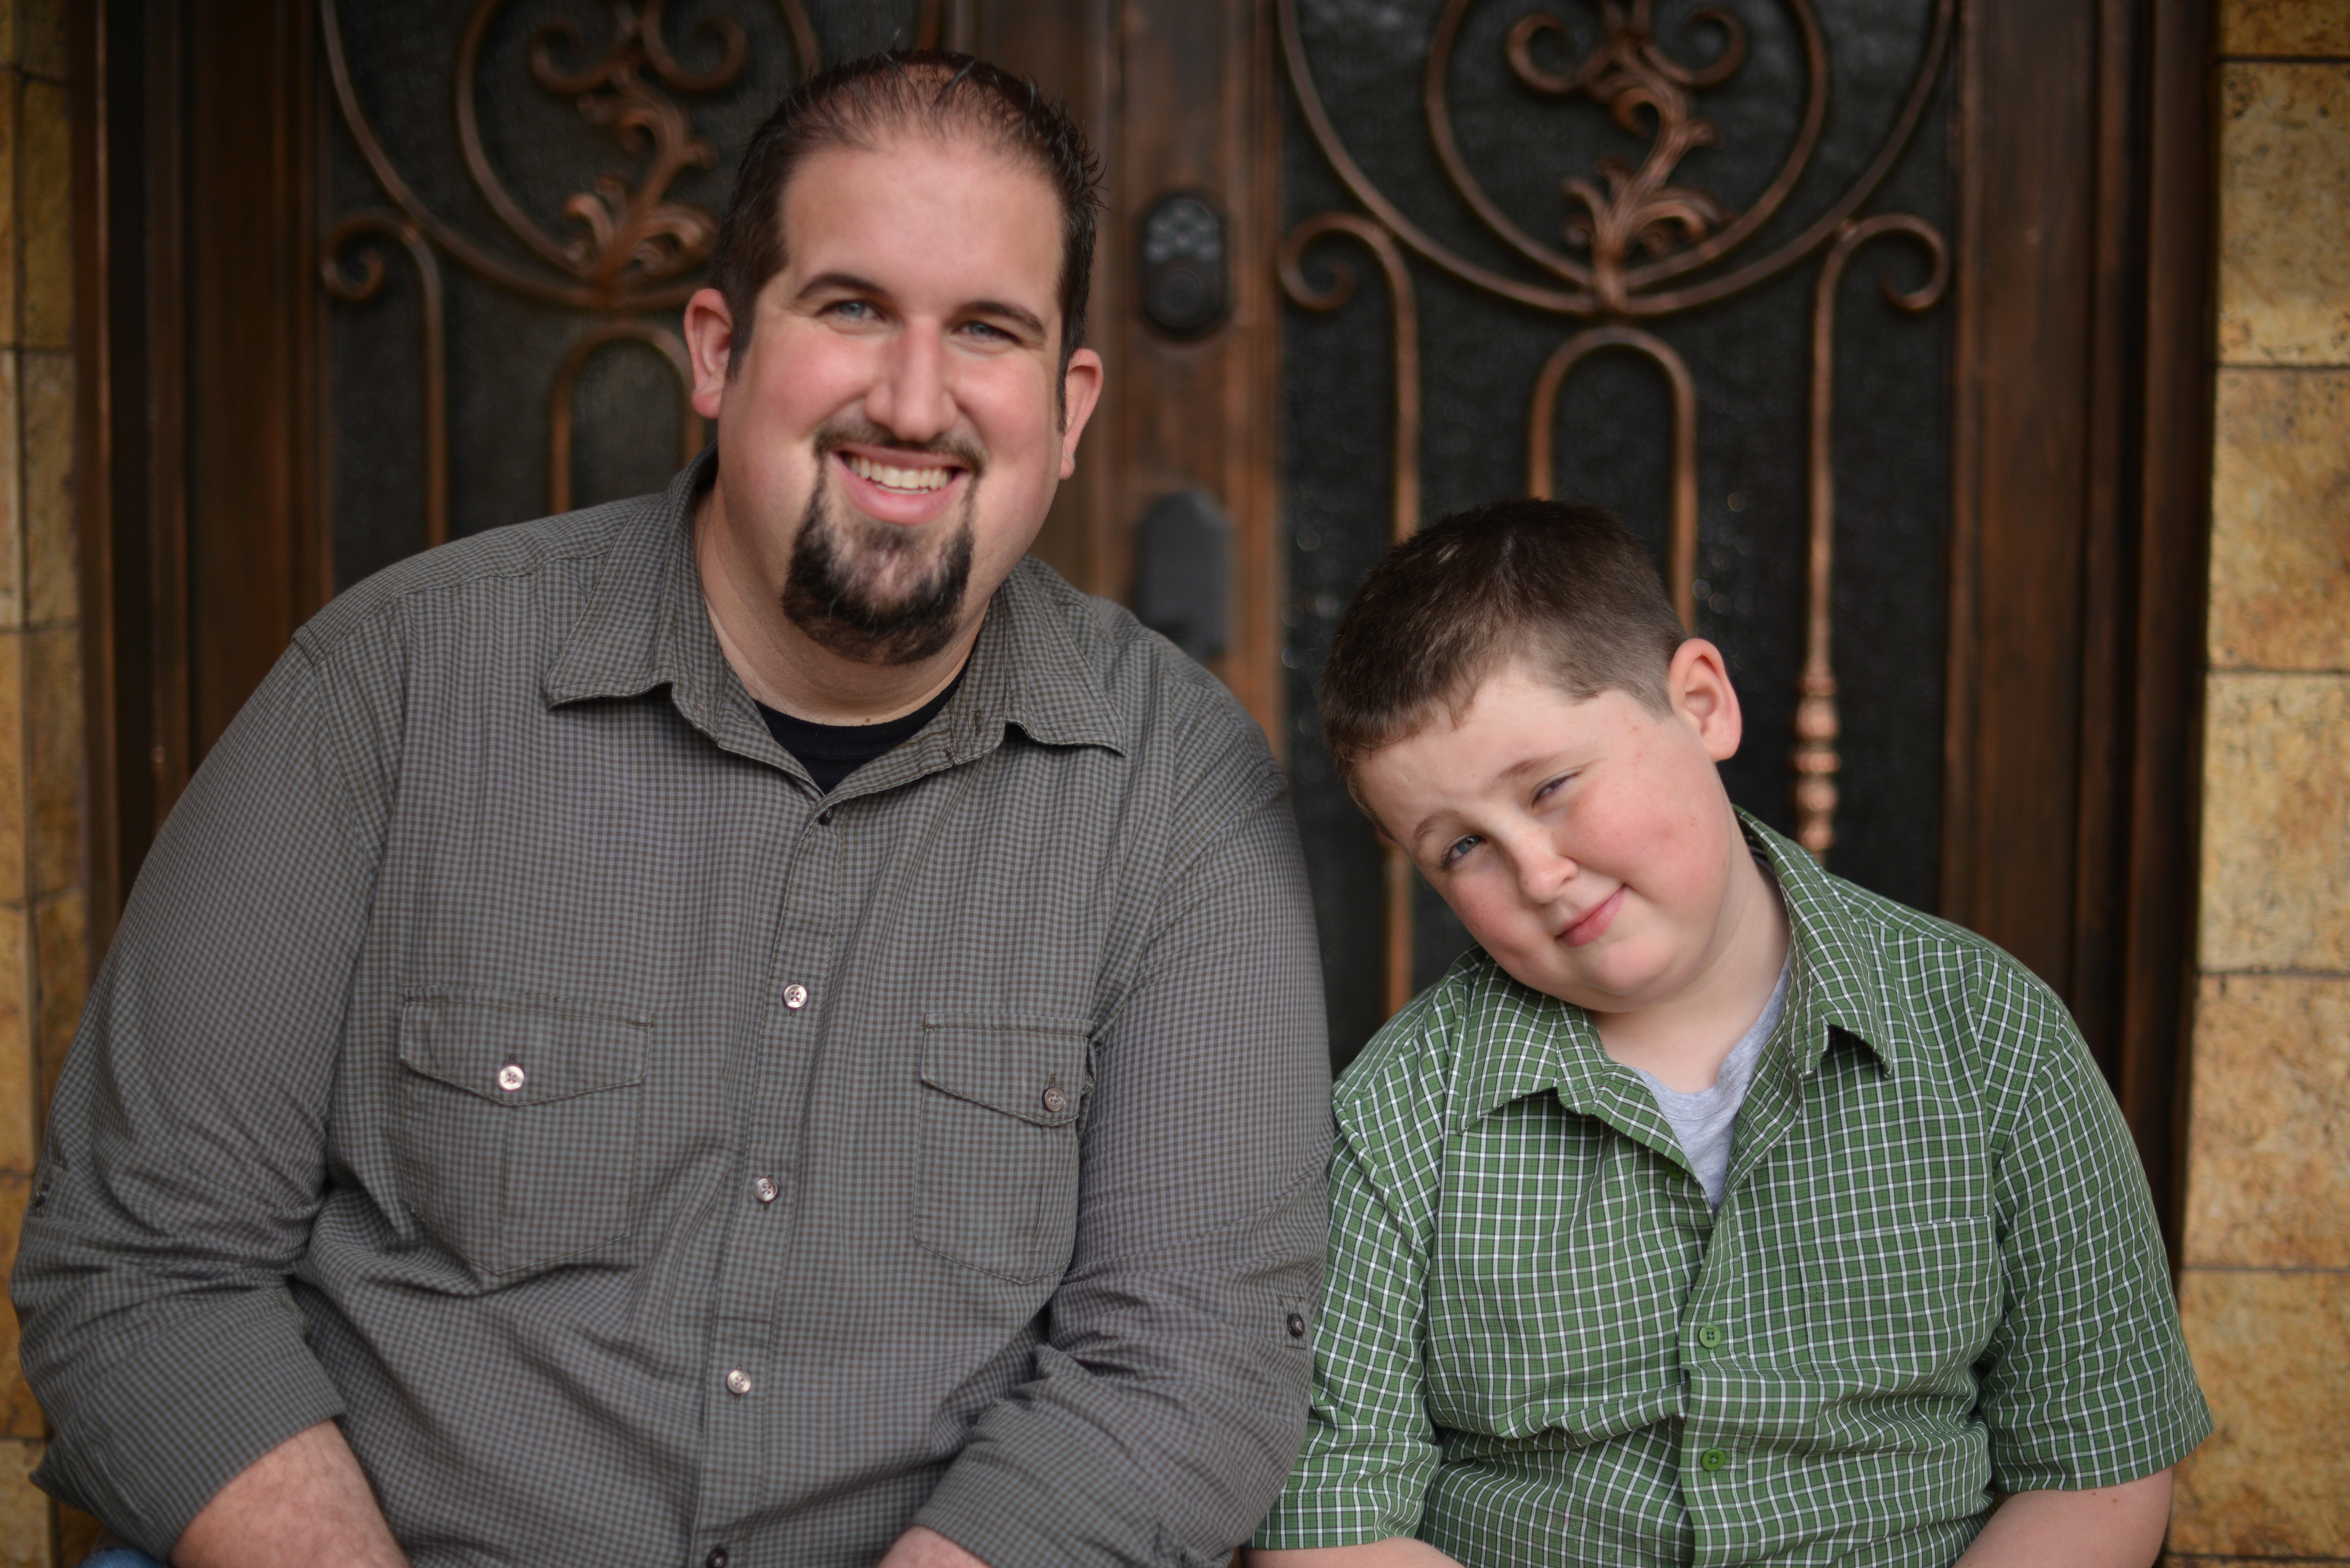 Aiden and his dad, Sean Meade. Aiden probably just said something ridiculous, which always cracks his dad up!